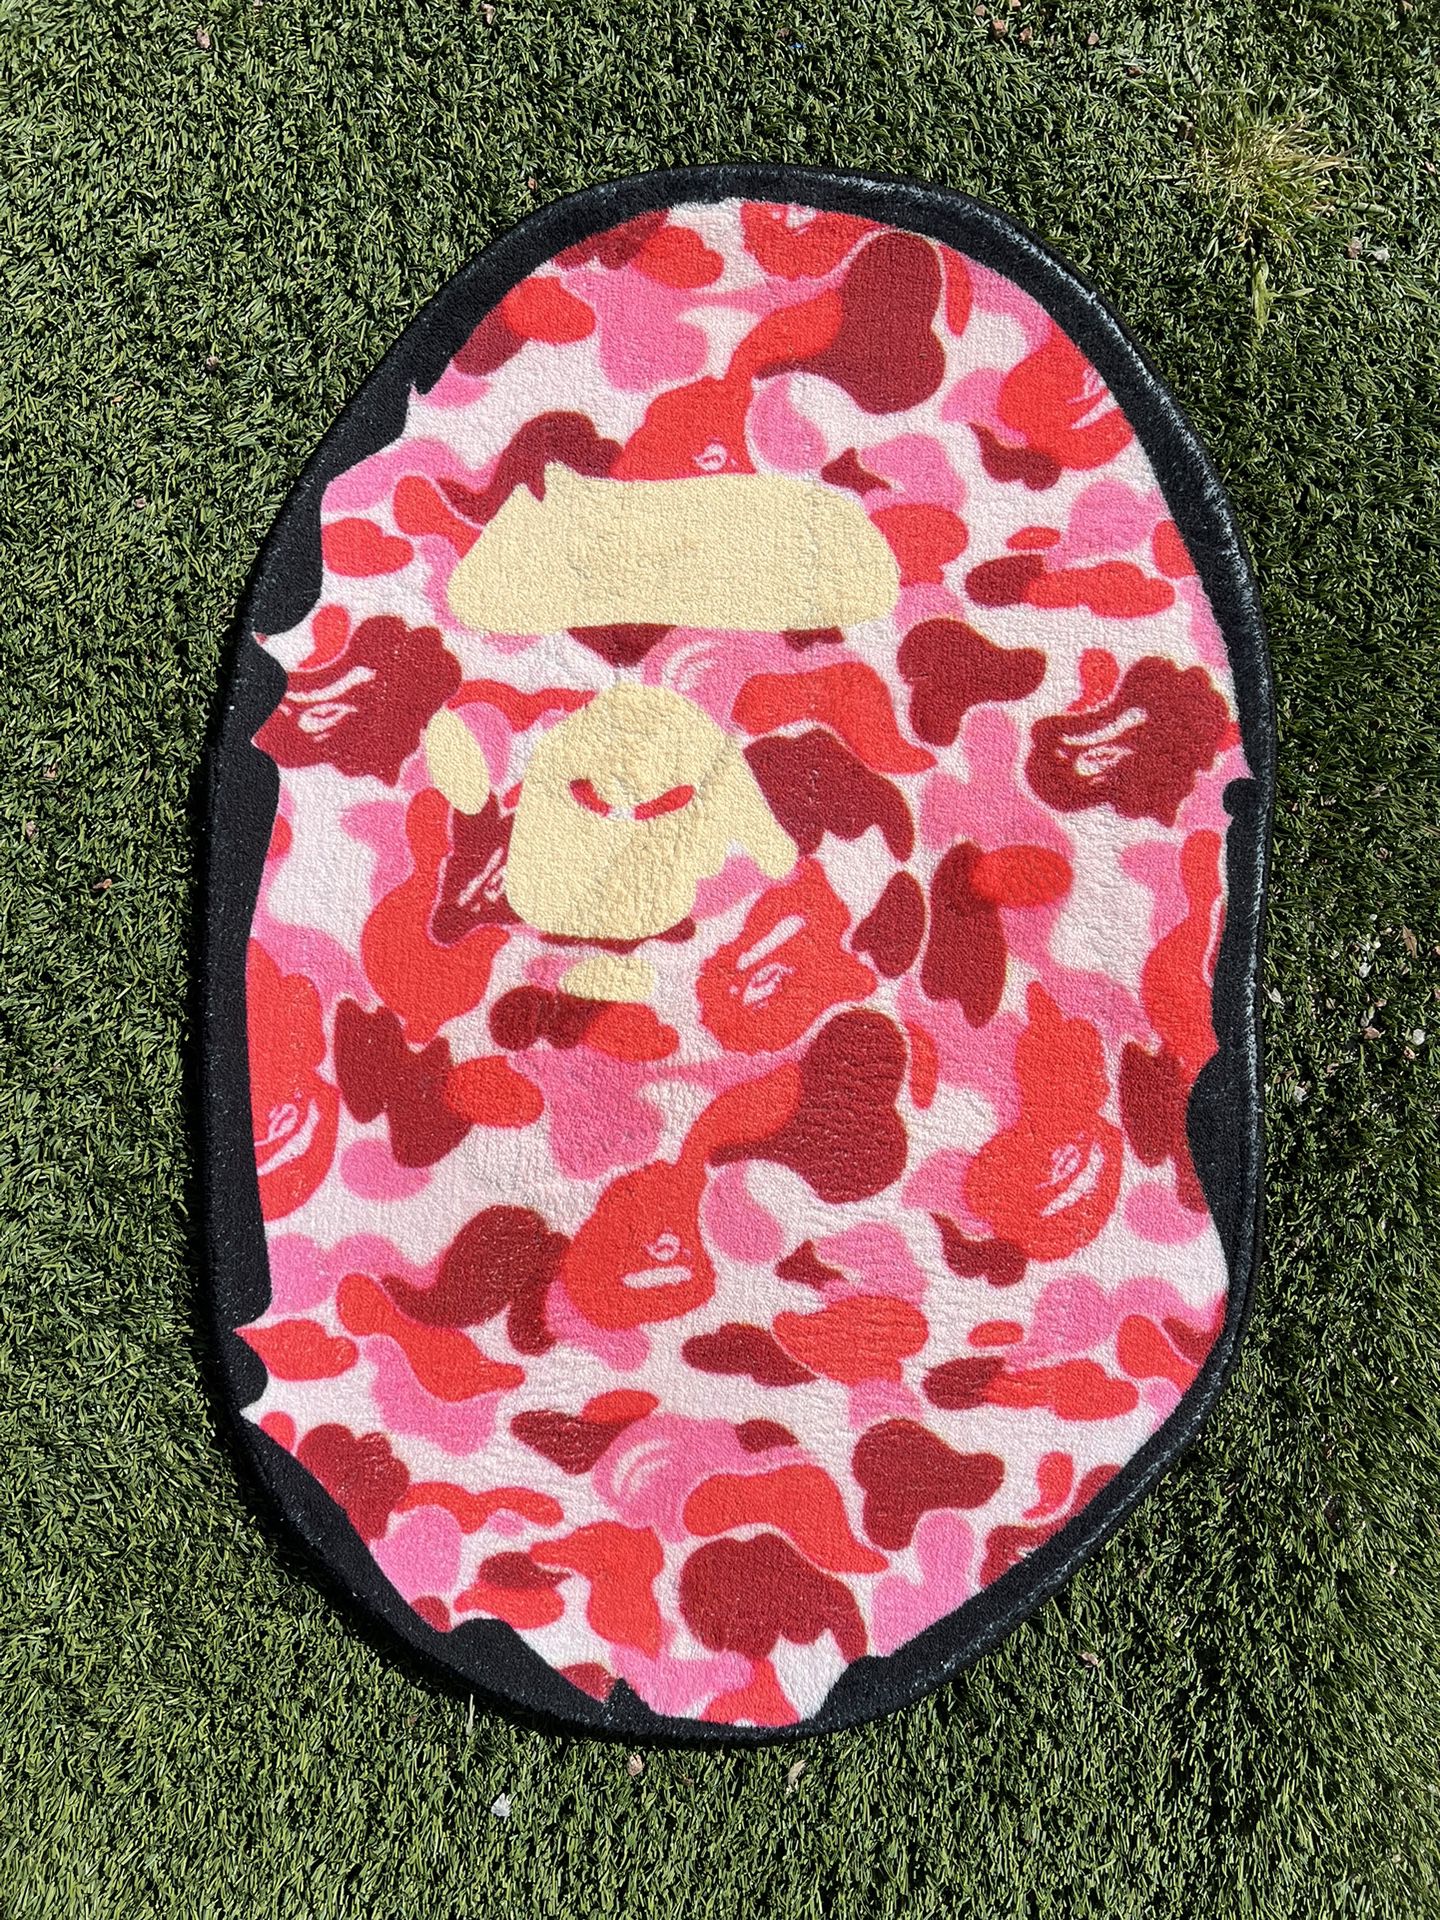 Bape Head Pink Soft Material 3FTx2FT Brand New 